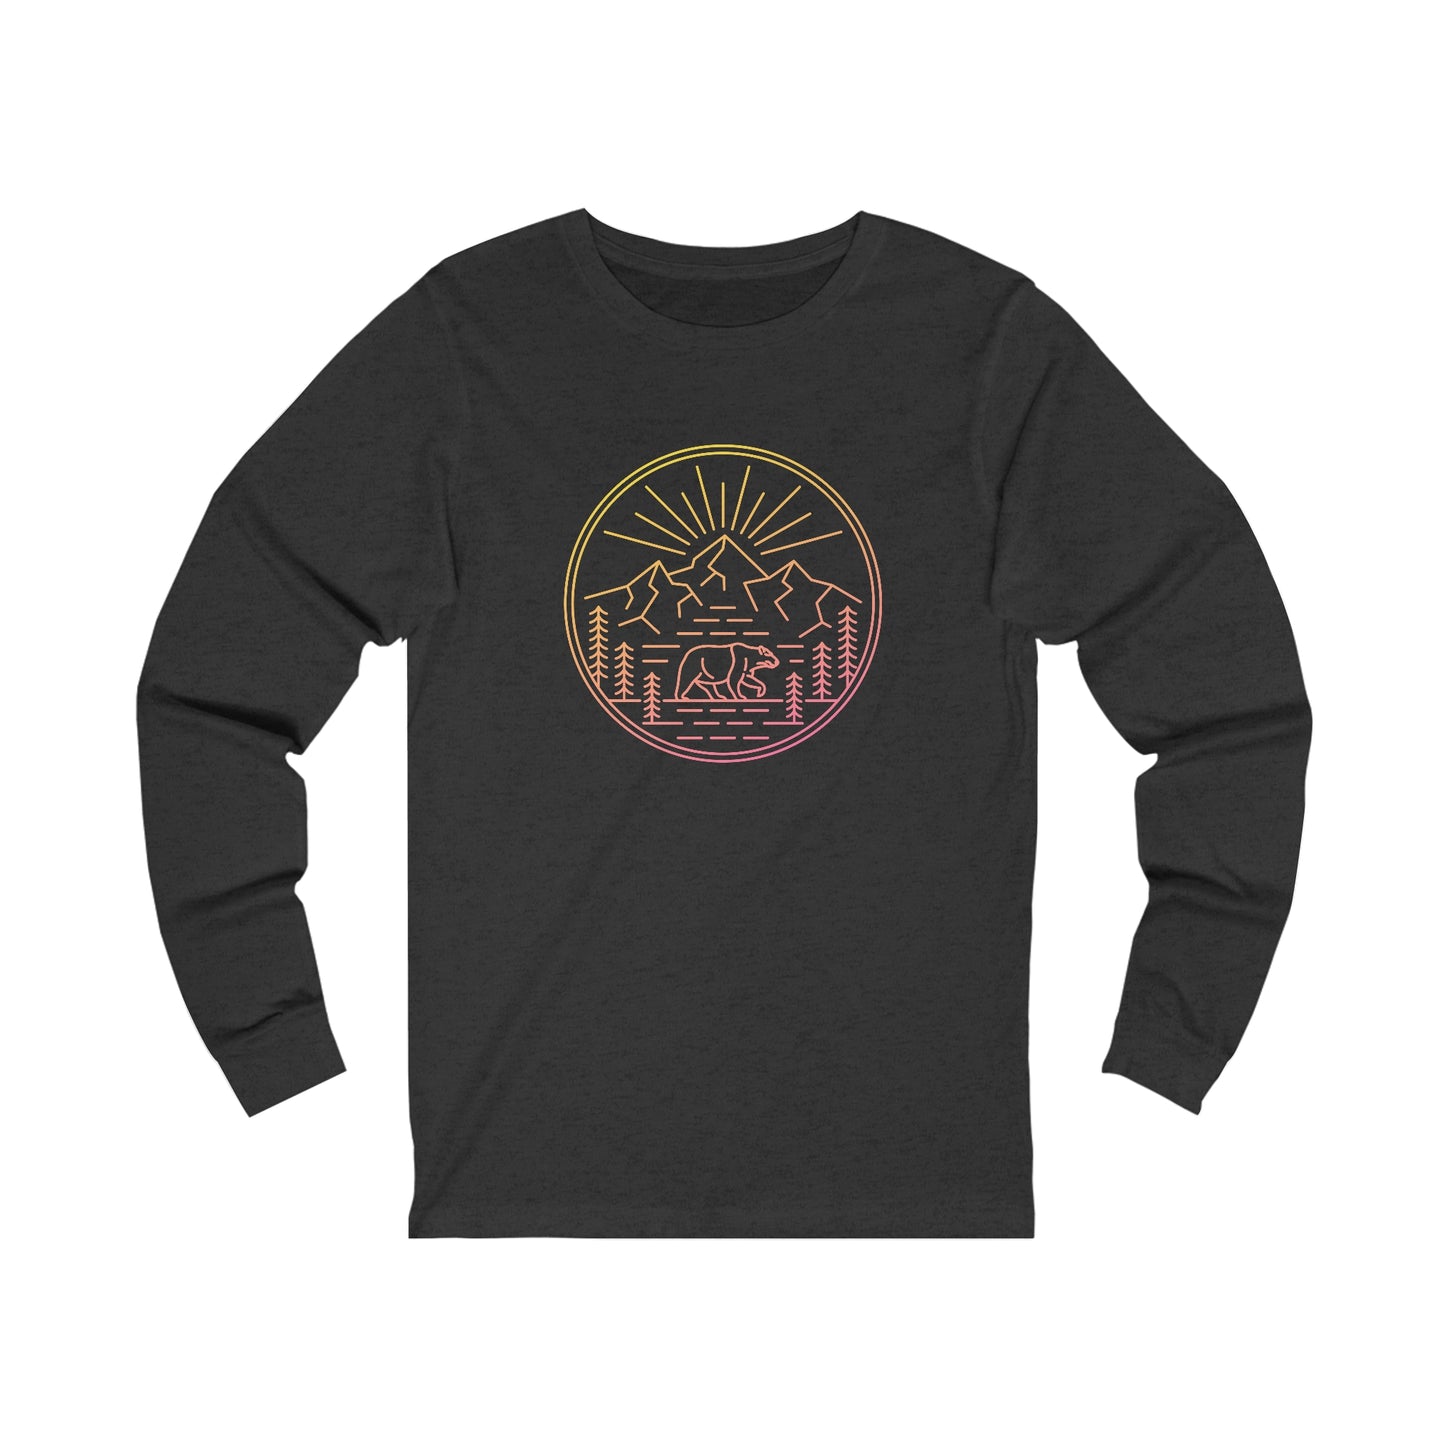 Explore The Outdoors. Unisex Jersey Long Sleeve Tee